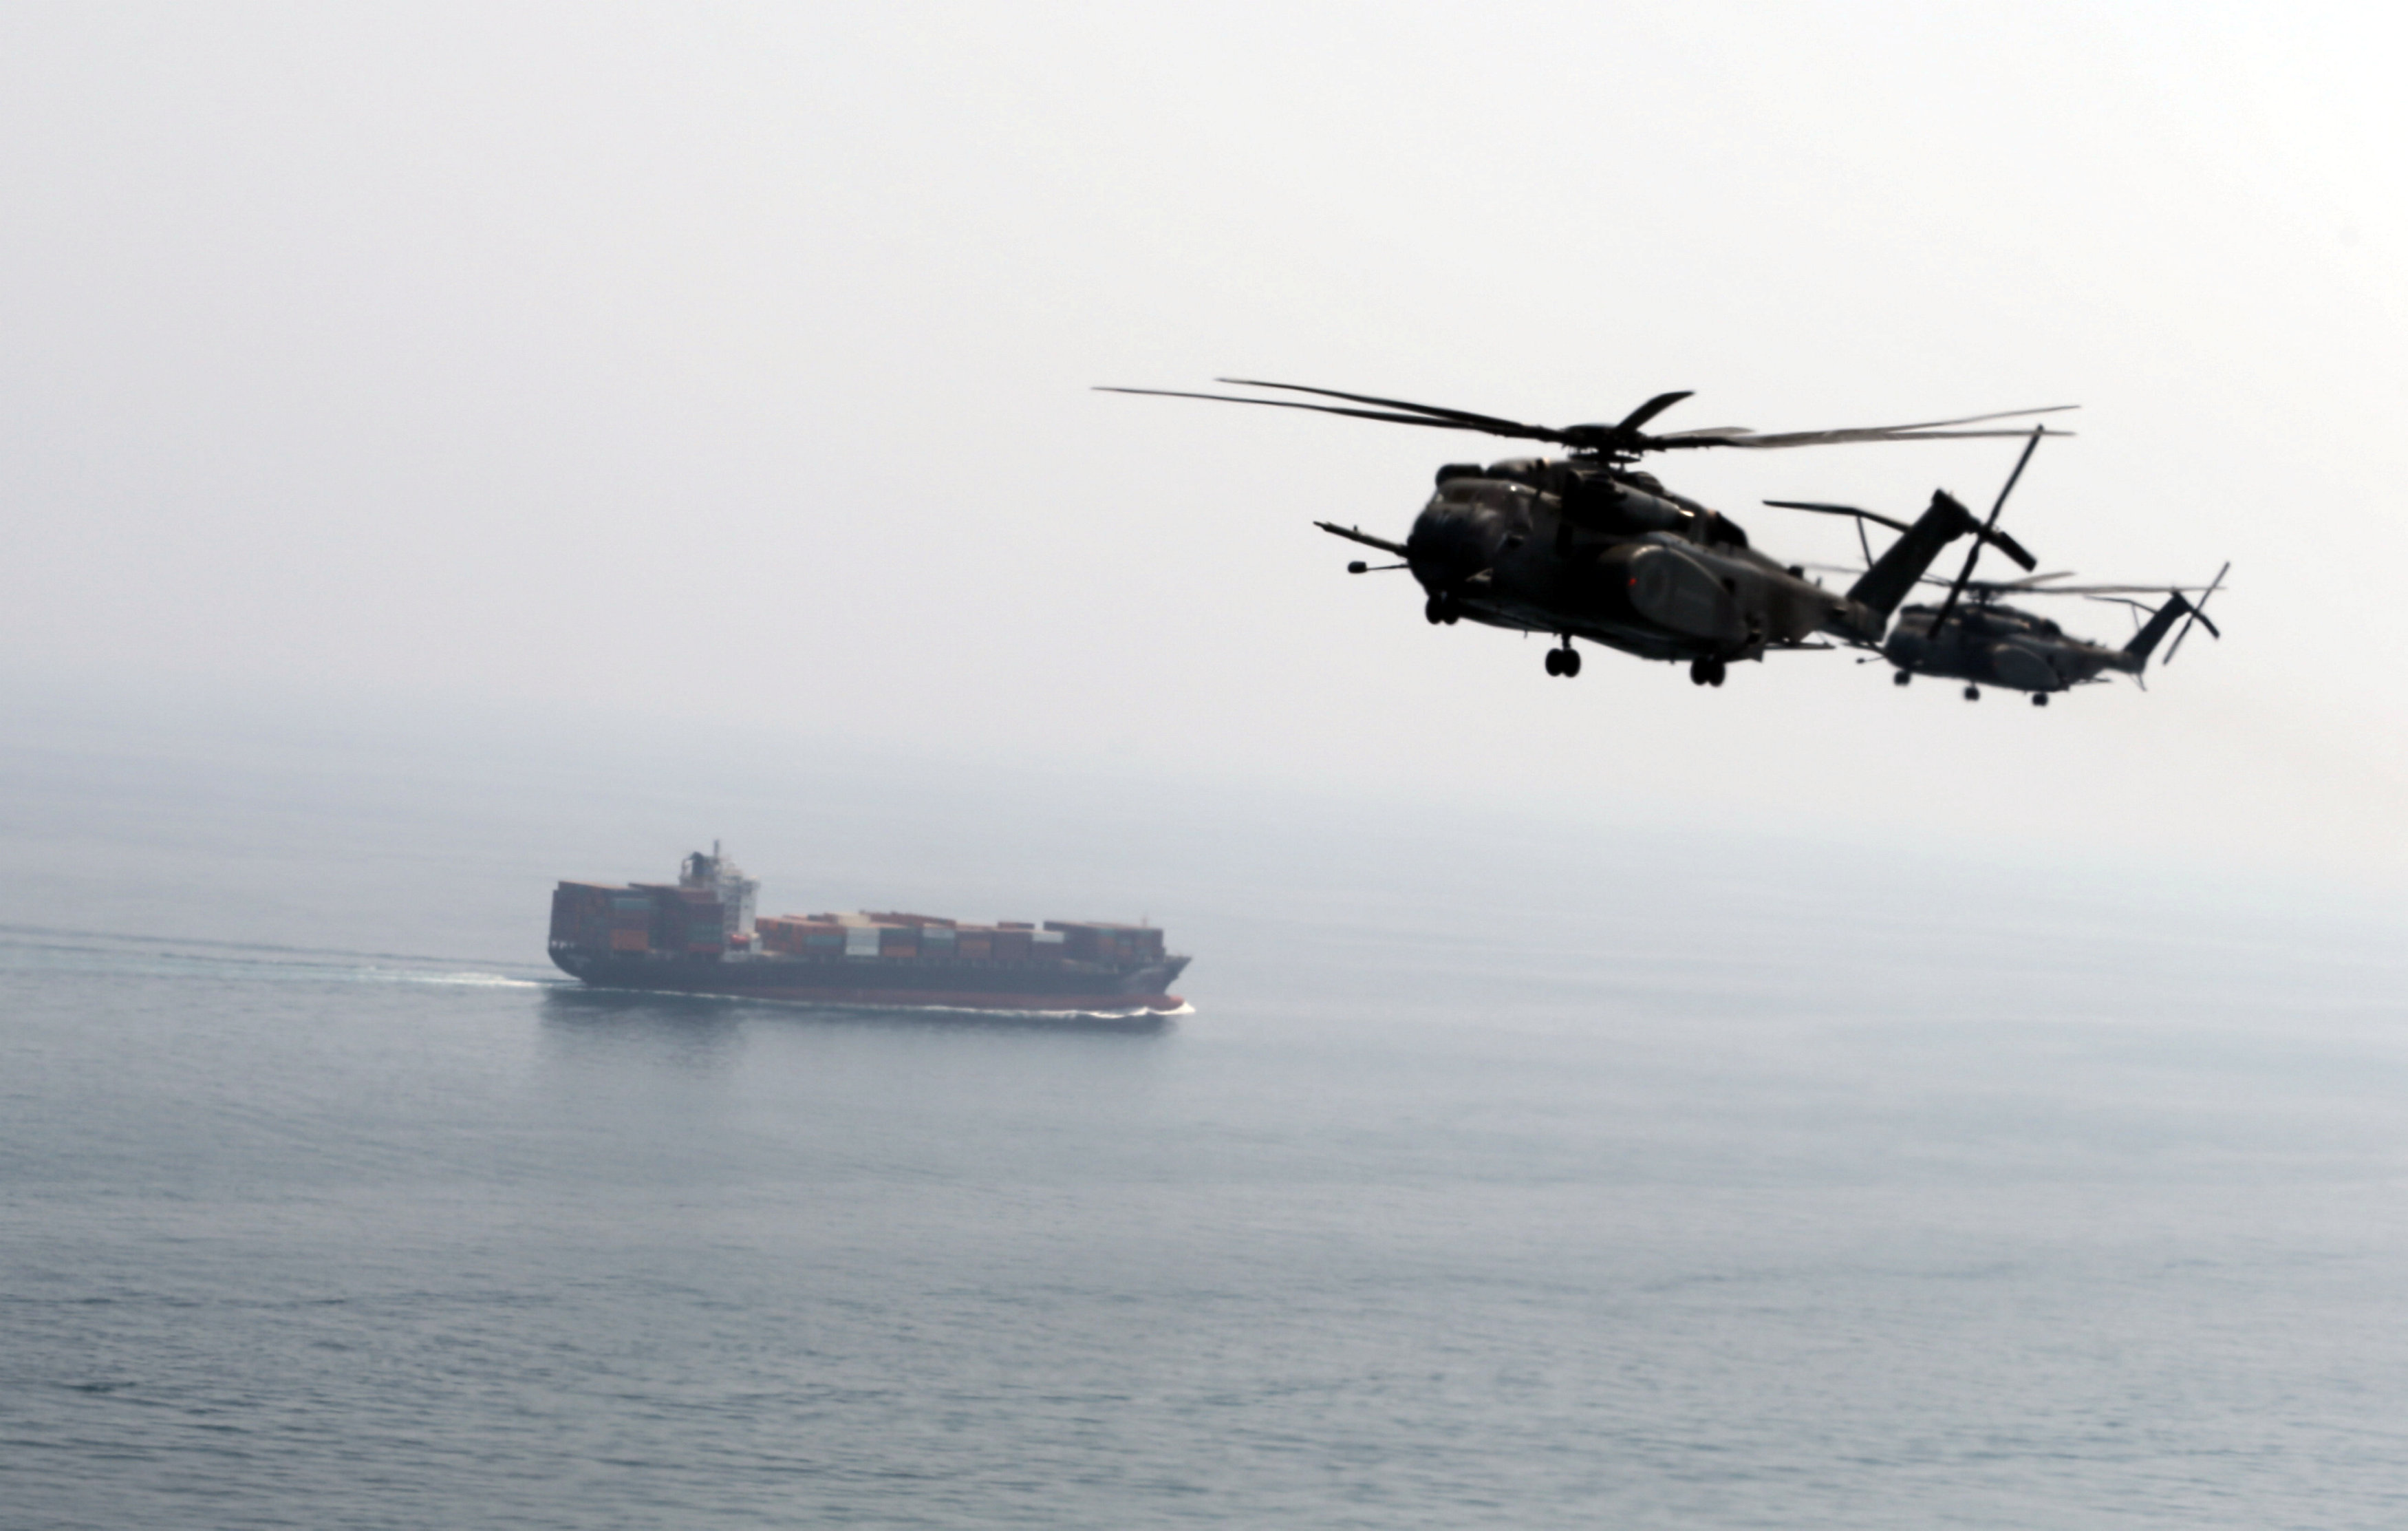 U.S. Navy MH-53E Sea Dragon helicopters are seen making their way to an exercise area as they take part in a U.S. and U.K. Mine Countermeasures Exercise (MCMEX) taking place at the Arabian Sea, as a cargo ship is seen sailing towards Straits of Harmoz